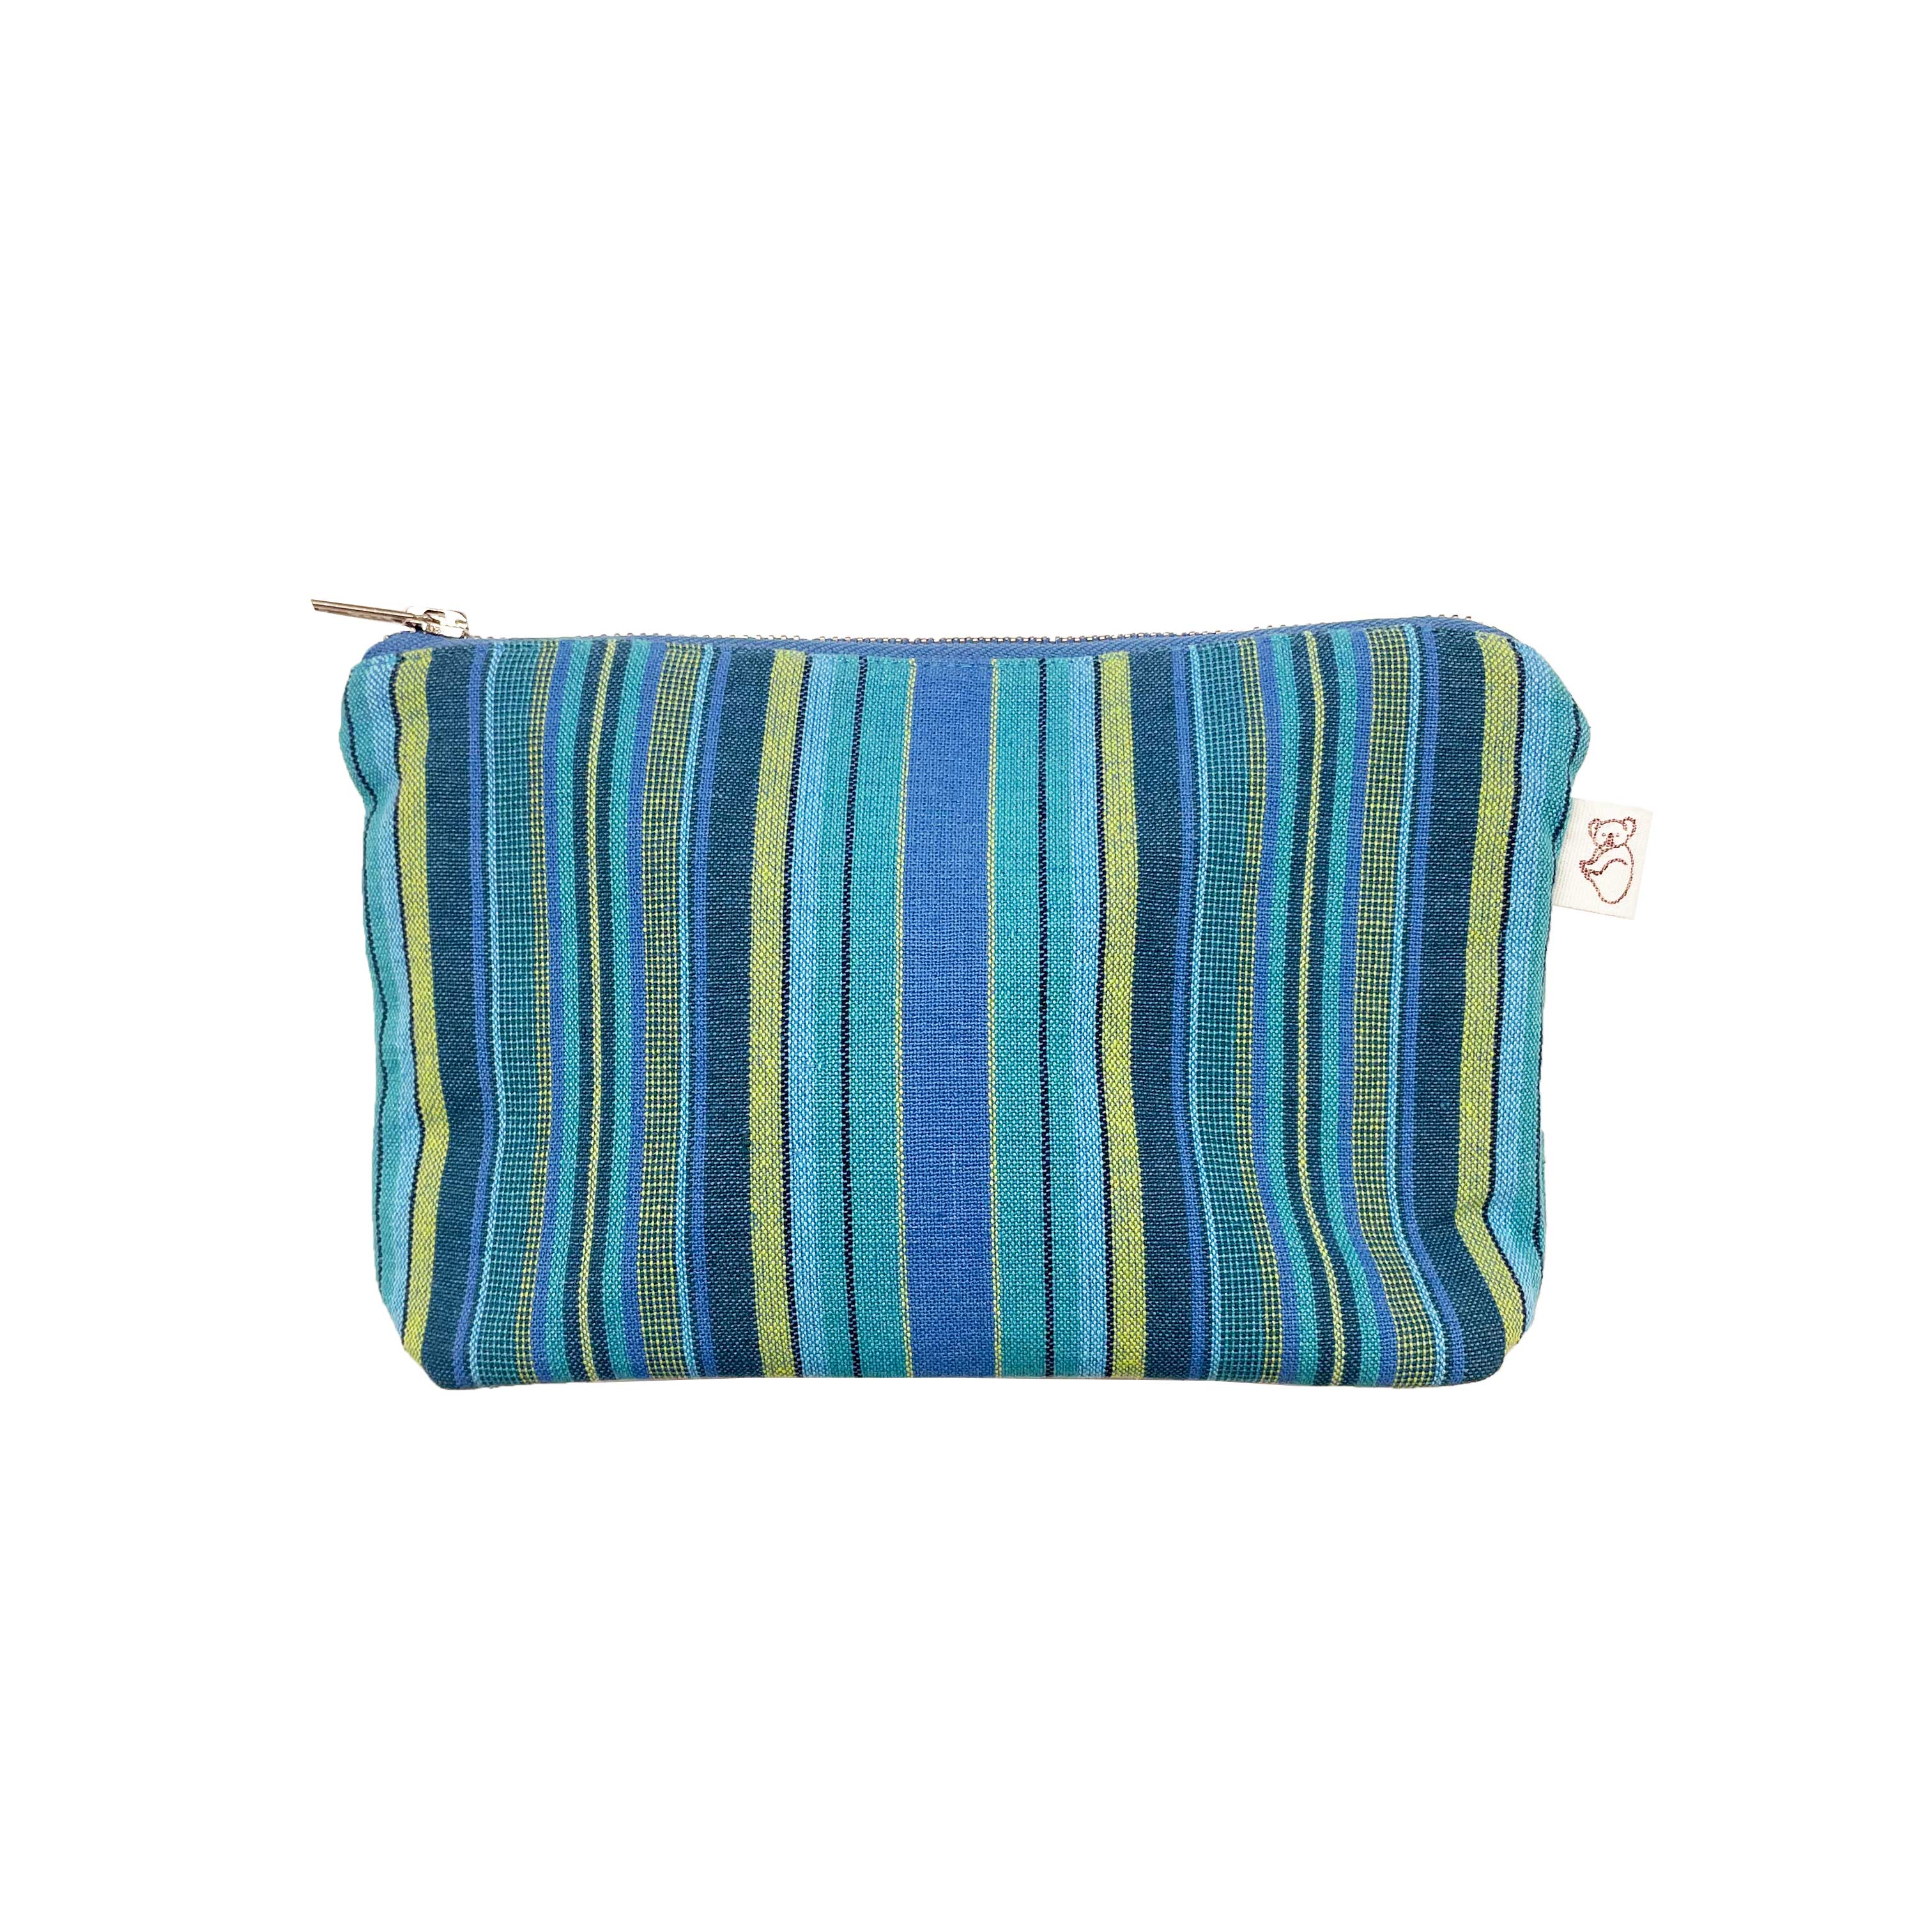 Makeup Bag Basics - Happy Blue Stripe Just $17.60 with code GETHAPPY - Quilted Koala